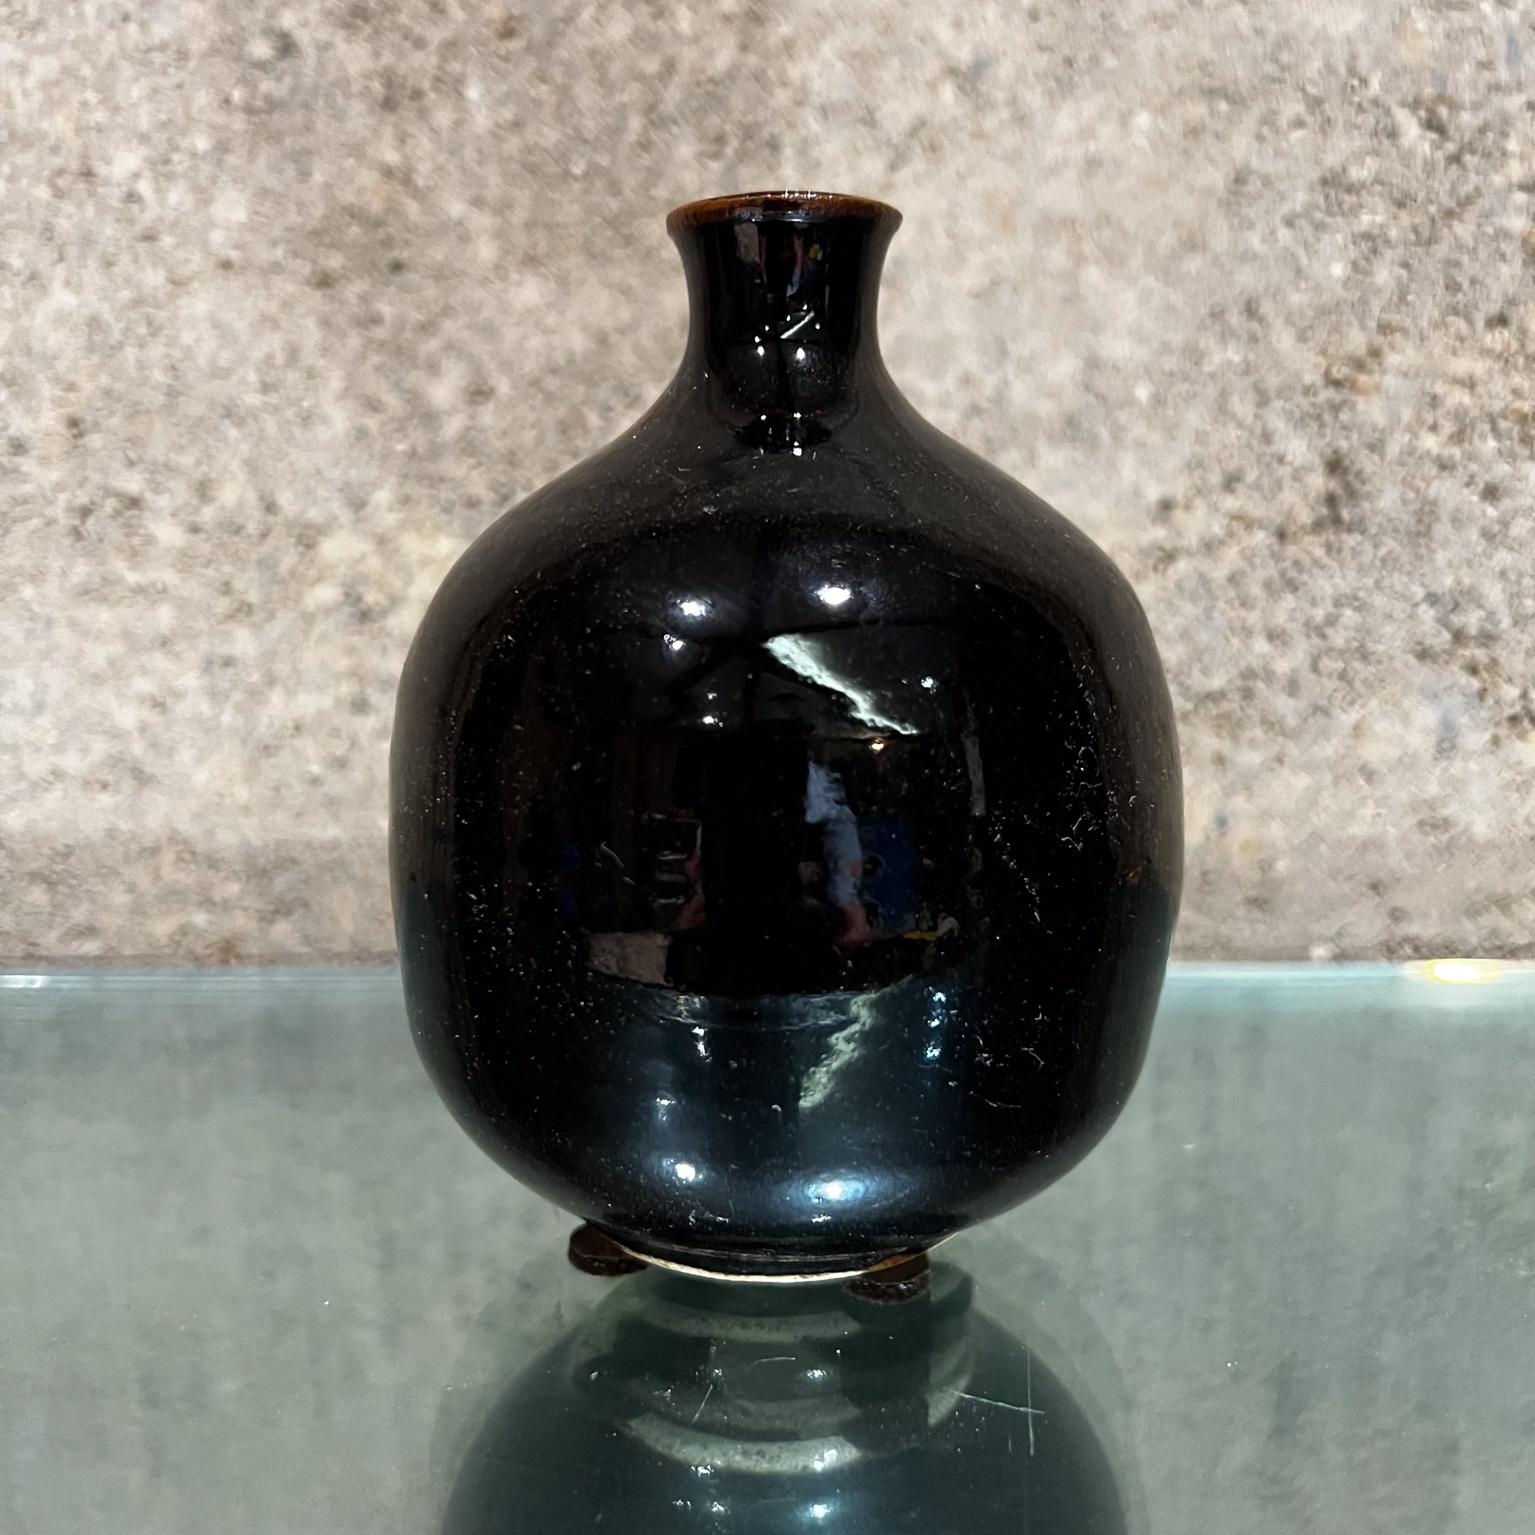 1960s Japanese Weed Pot Vase Dark Brown Glaze
3.75 diameter x 4.5 h
Signed but unable to read.
Original vintage condition
Refer to images.




